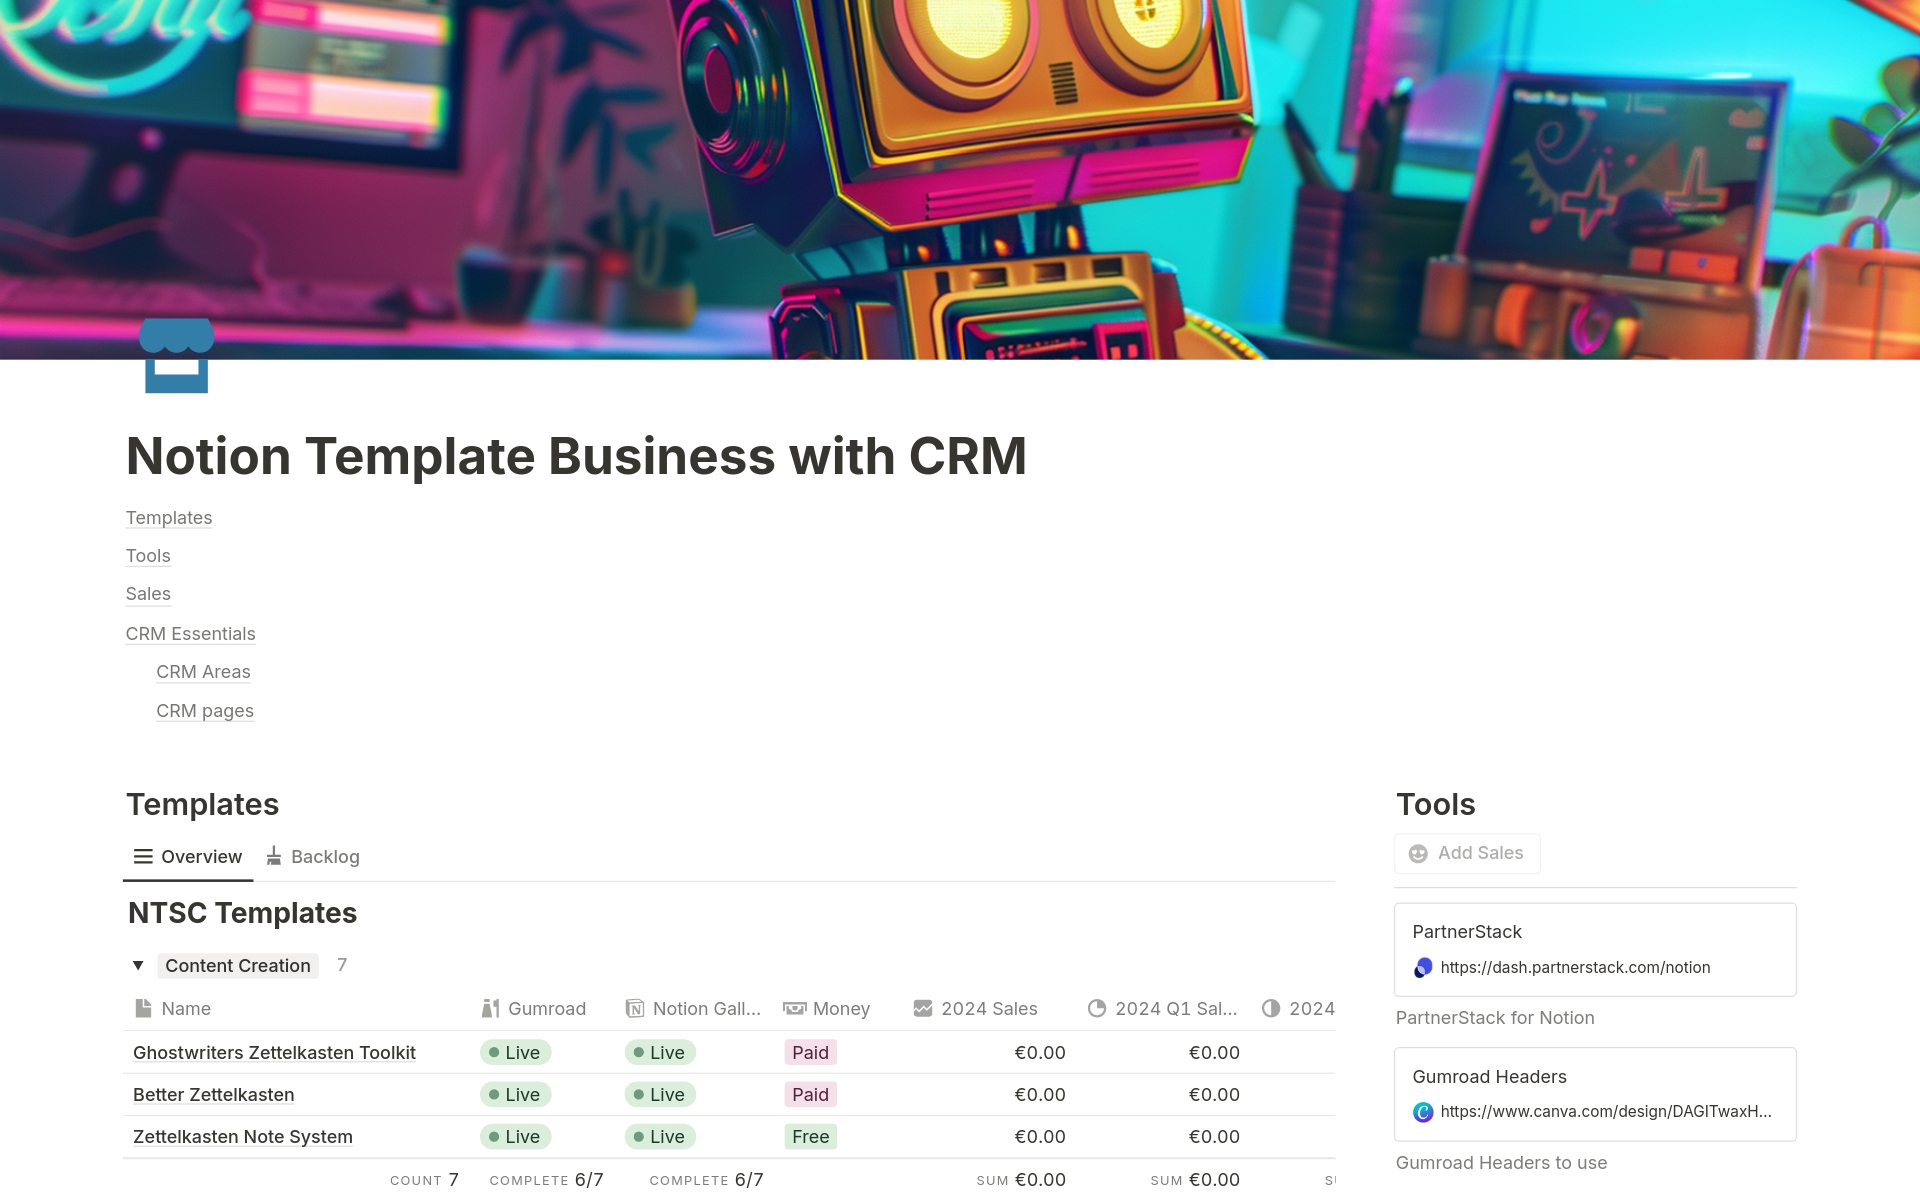 Introducing Creative Workflow Manager + Mini CRM – the ultimate tool to streamline your template workflow, enhance productivity, and easily manage your professional network. 